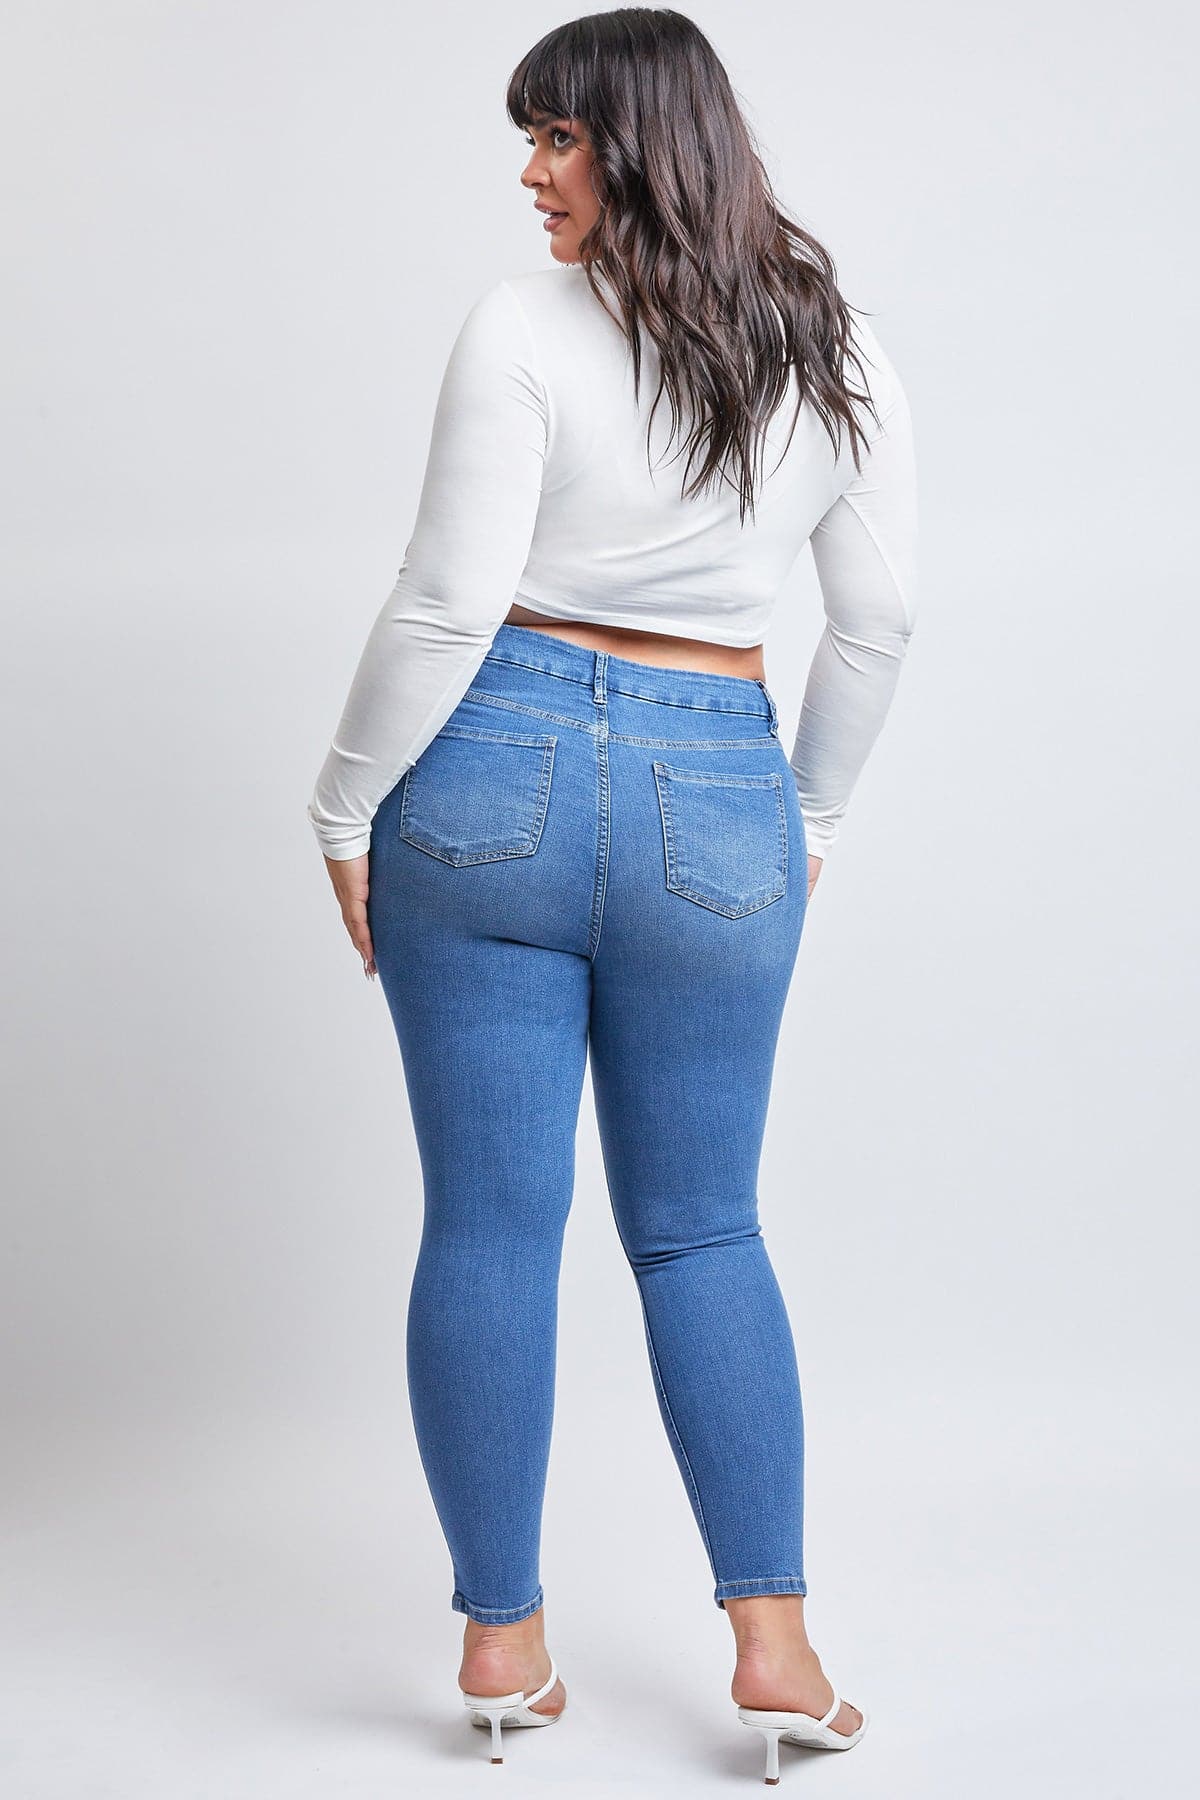 Women's Plus Size Sustainable Curvy Fit  Skinny Jeans